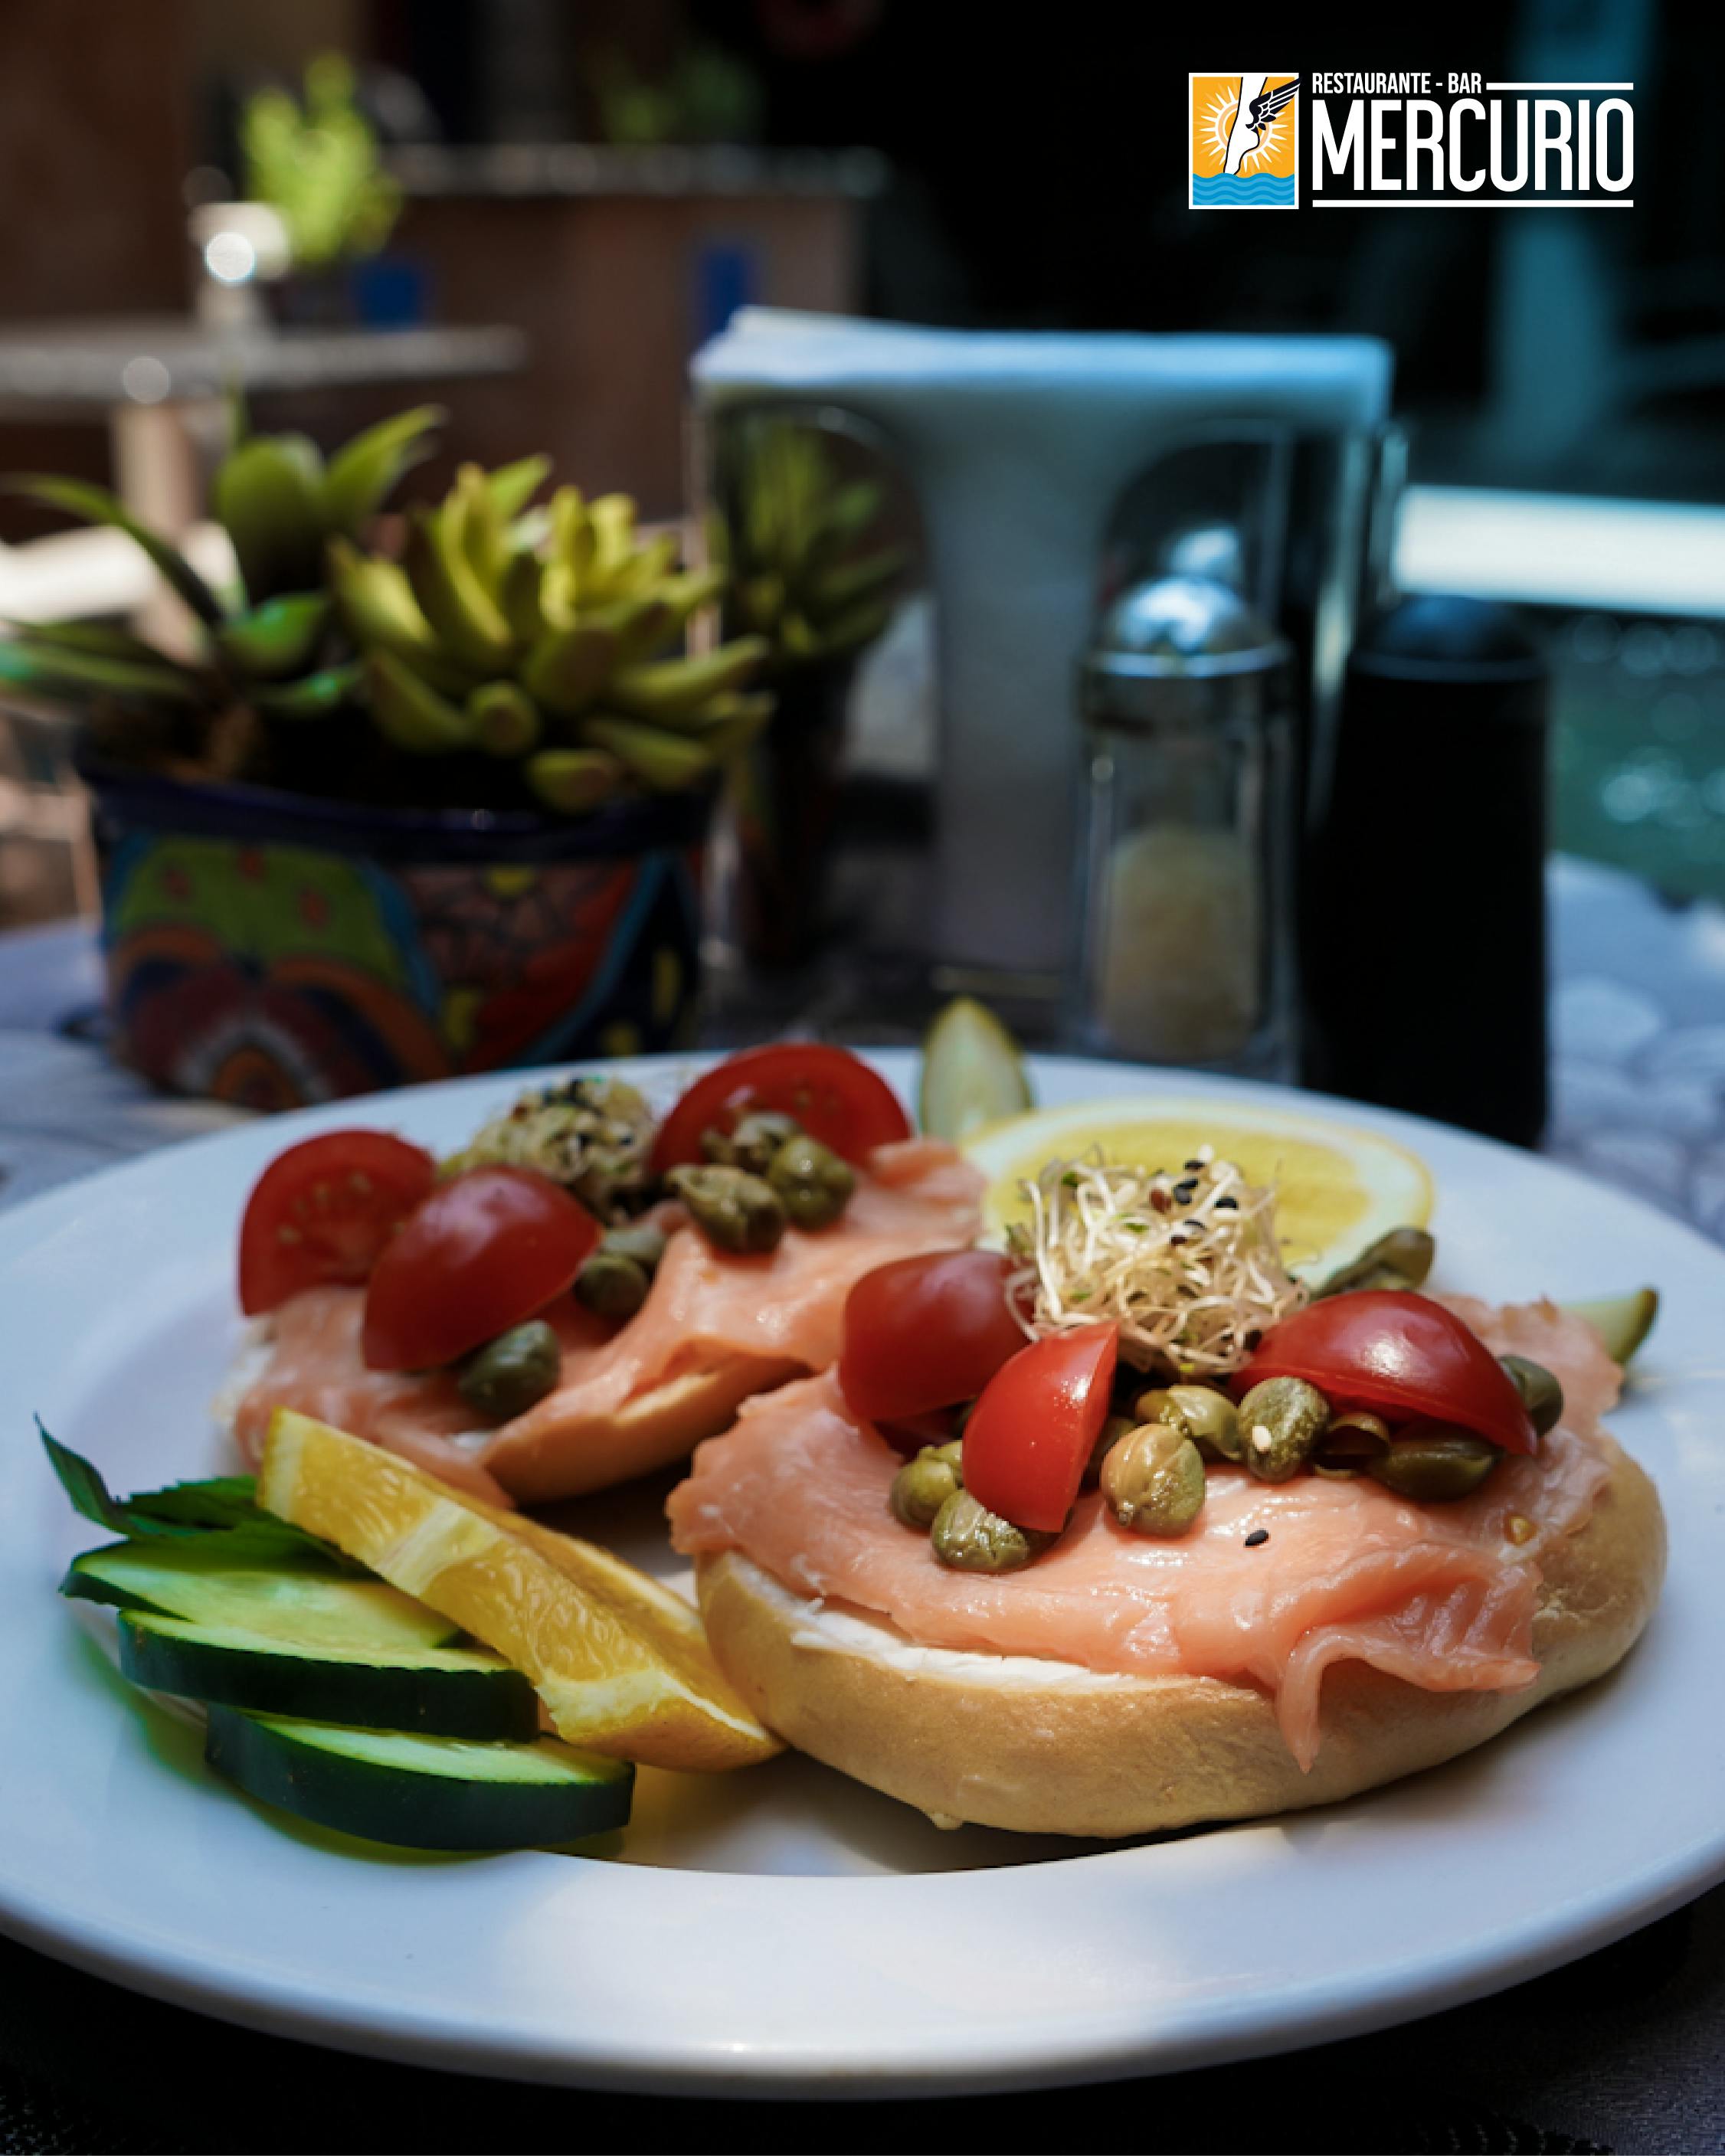 Bagel with Smoked Salmon, Cream Cheese, Capers, Onion & Tomato